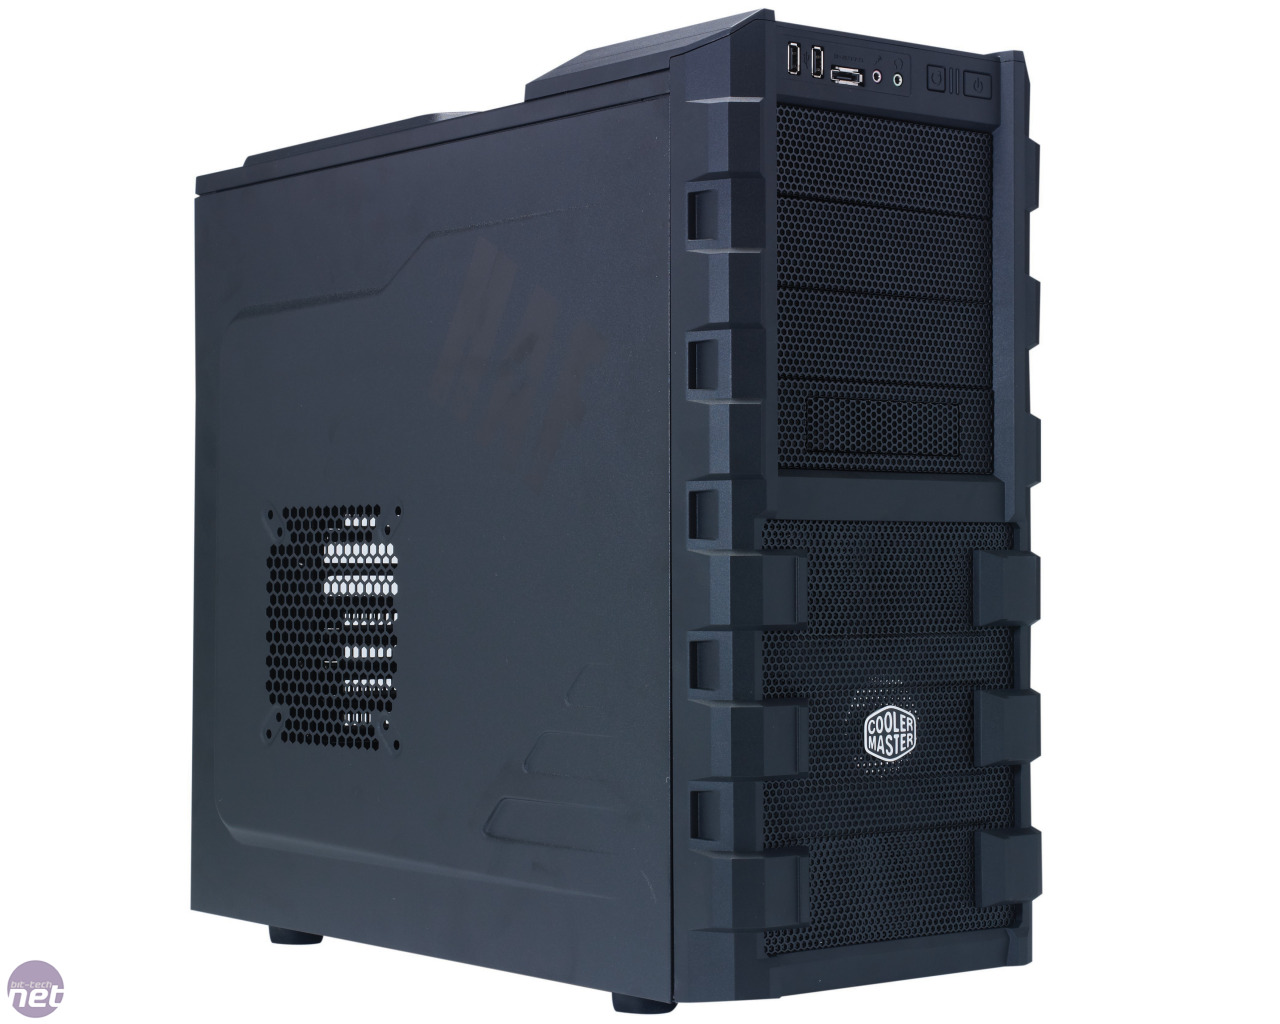 cooler-master-haf-912-mid-tower-computer-case-with-high-airflow